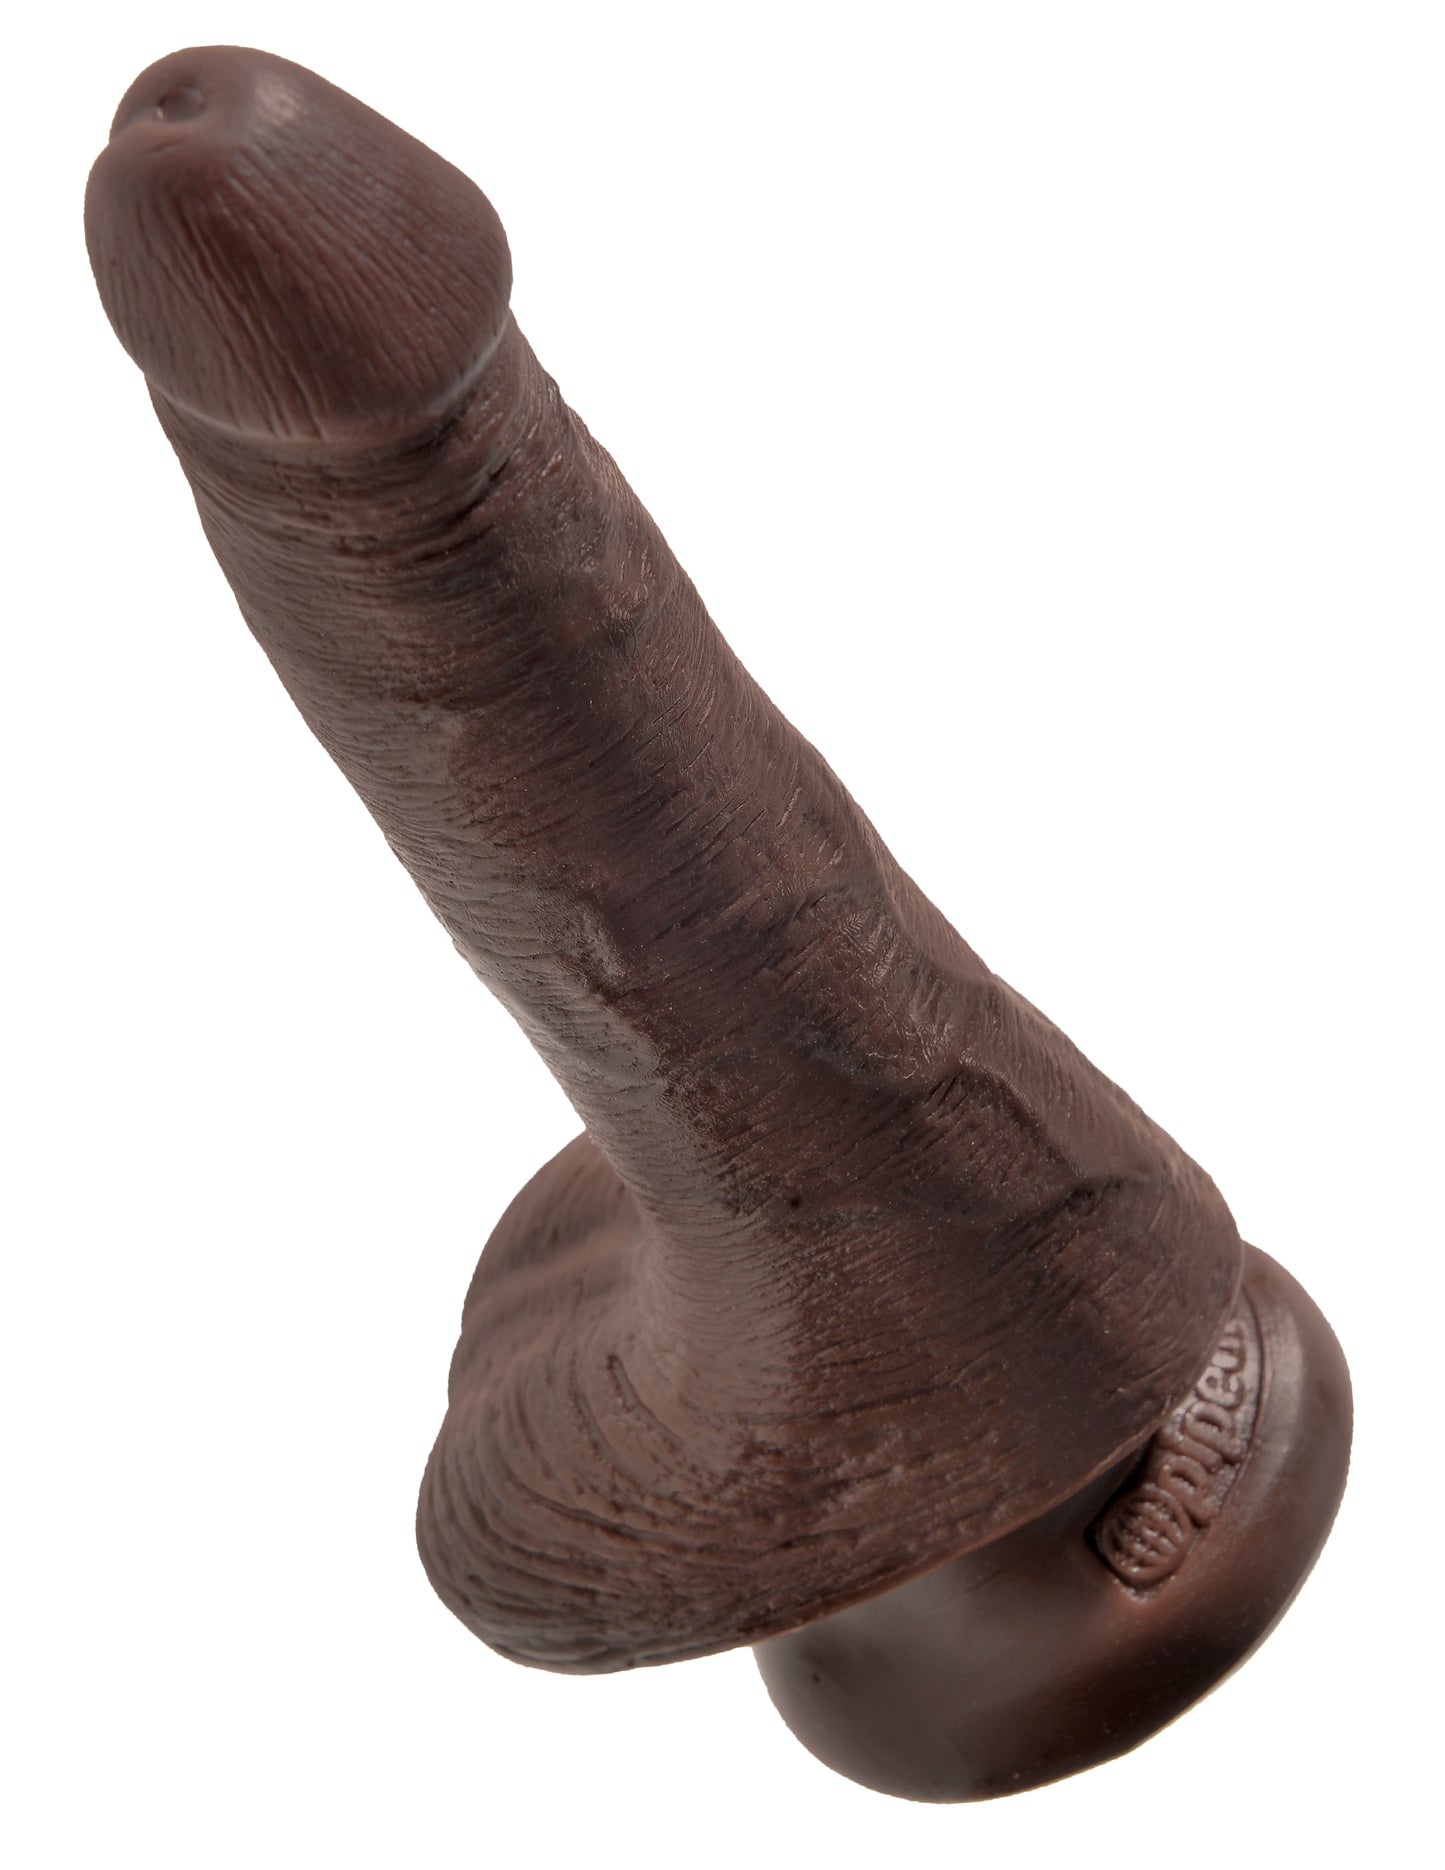 King Cock - 6 inch with balls - Brown